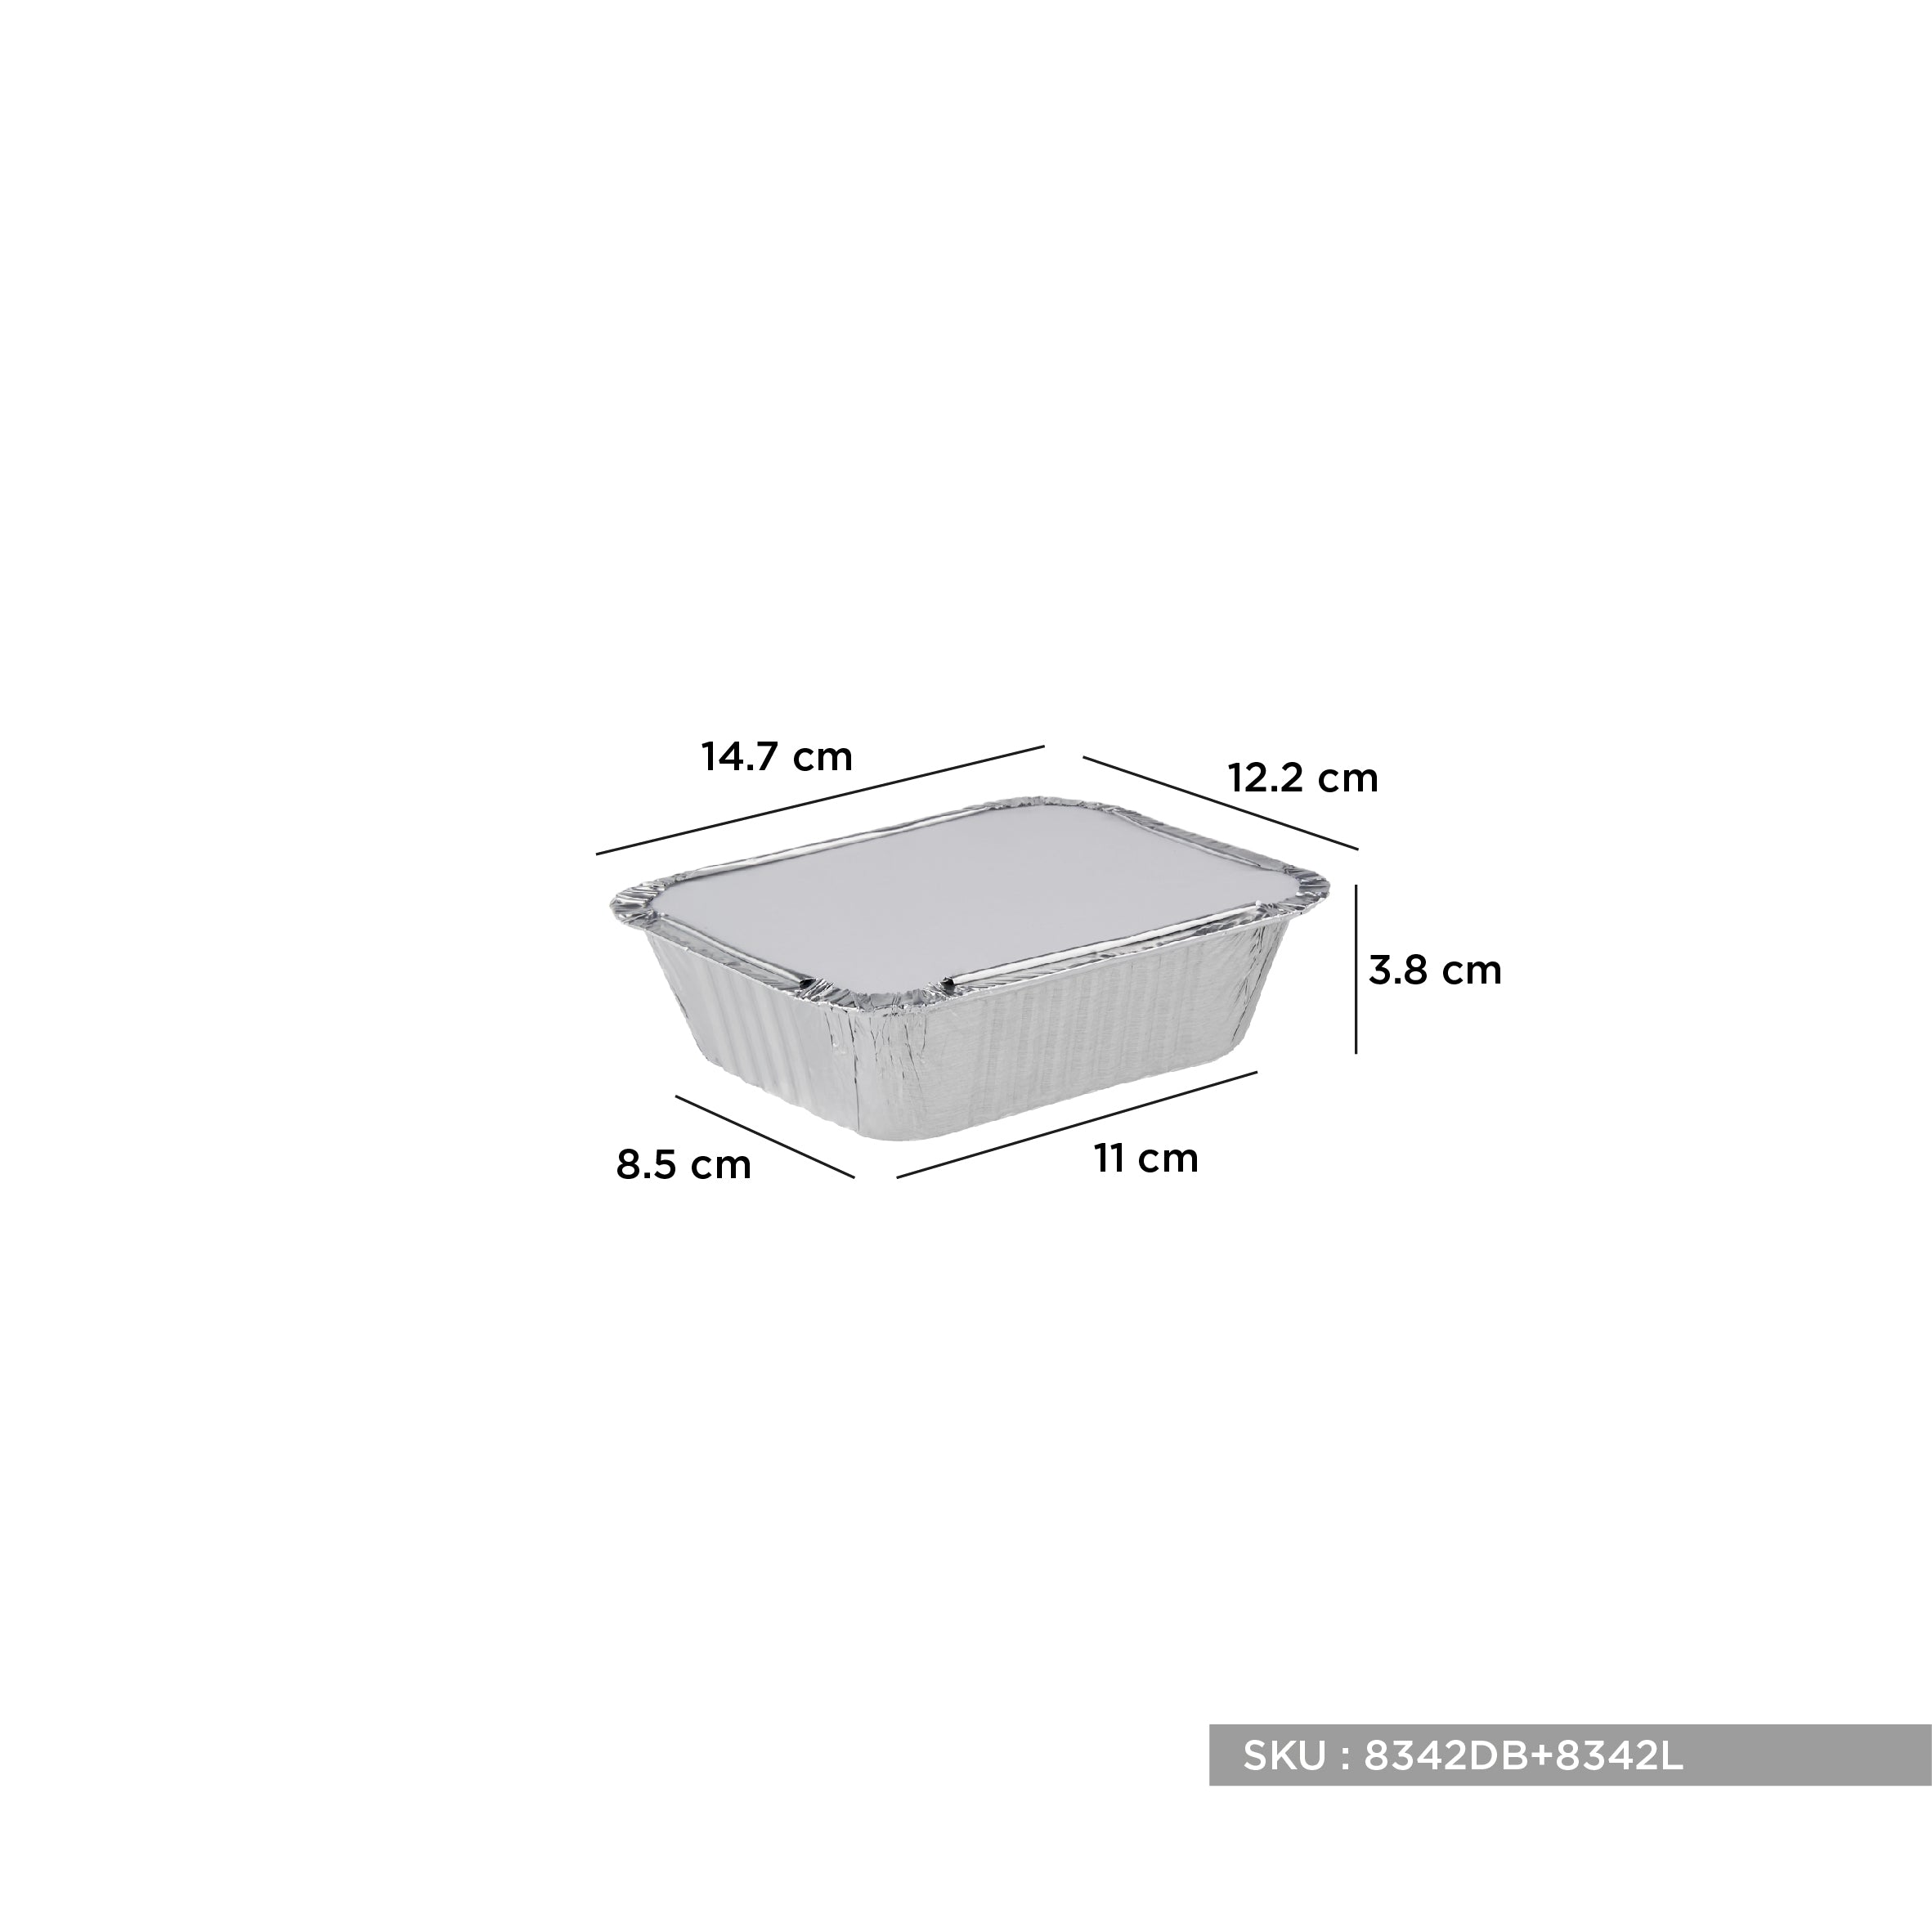 Aluminium takeout container - Hotpack Global